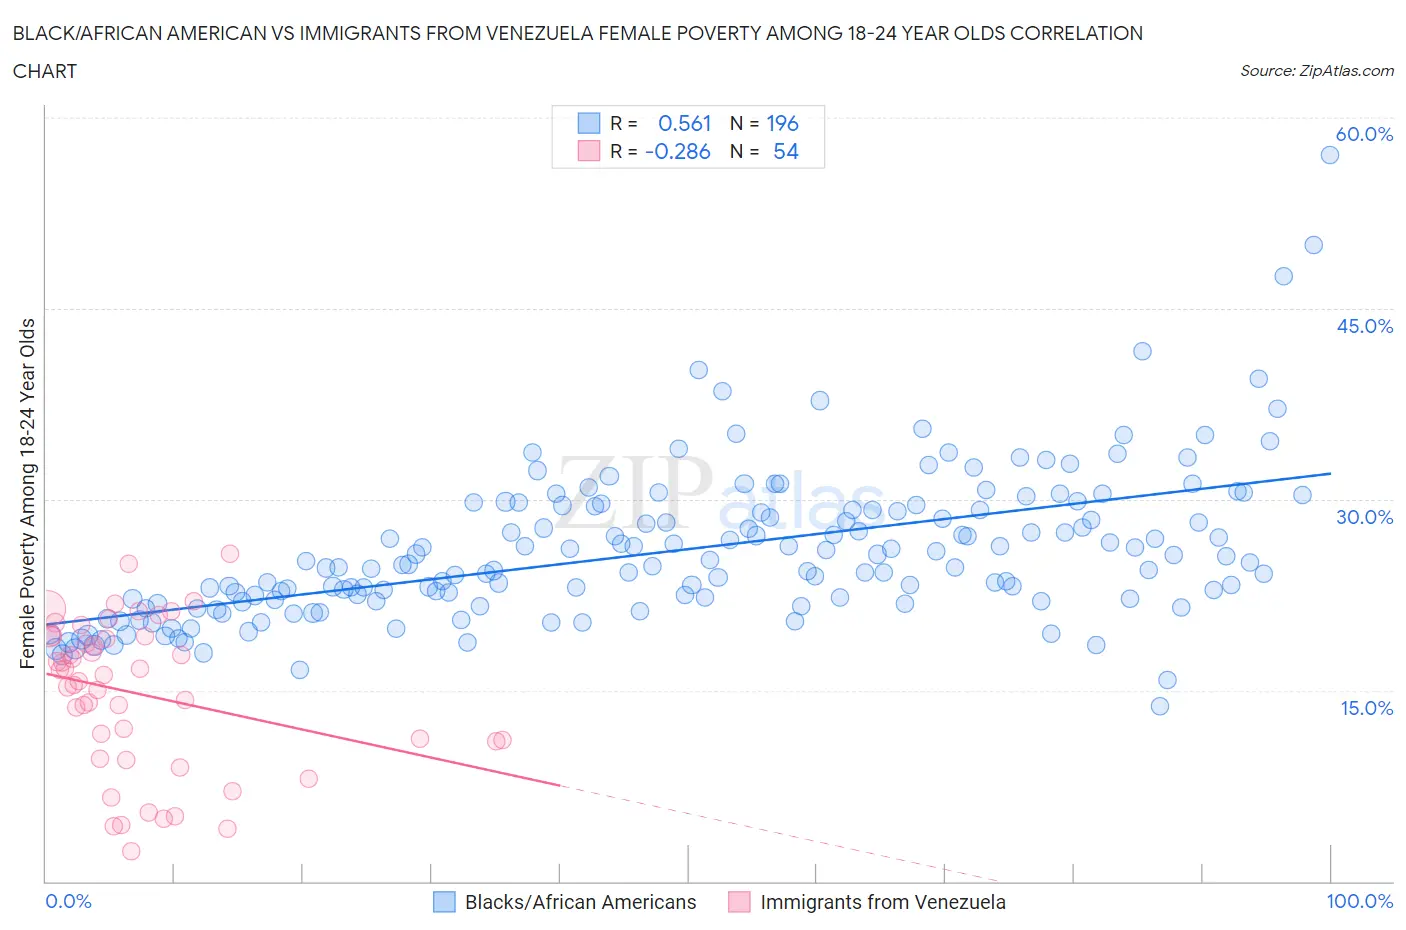 Black/African American vs Immigrants from Venezuela Female Poverty Among 18-24 Year Olds